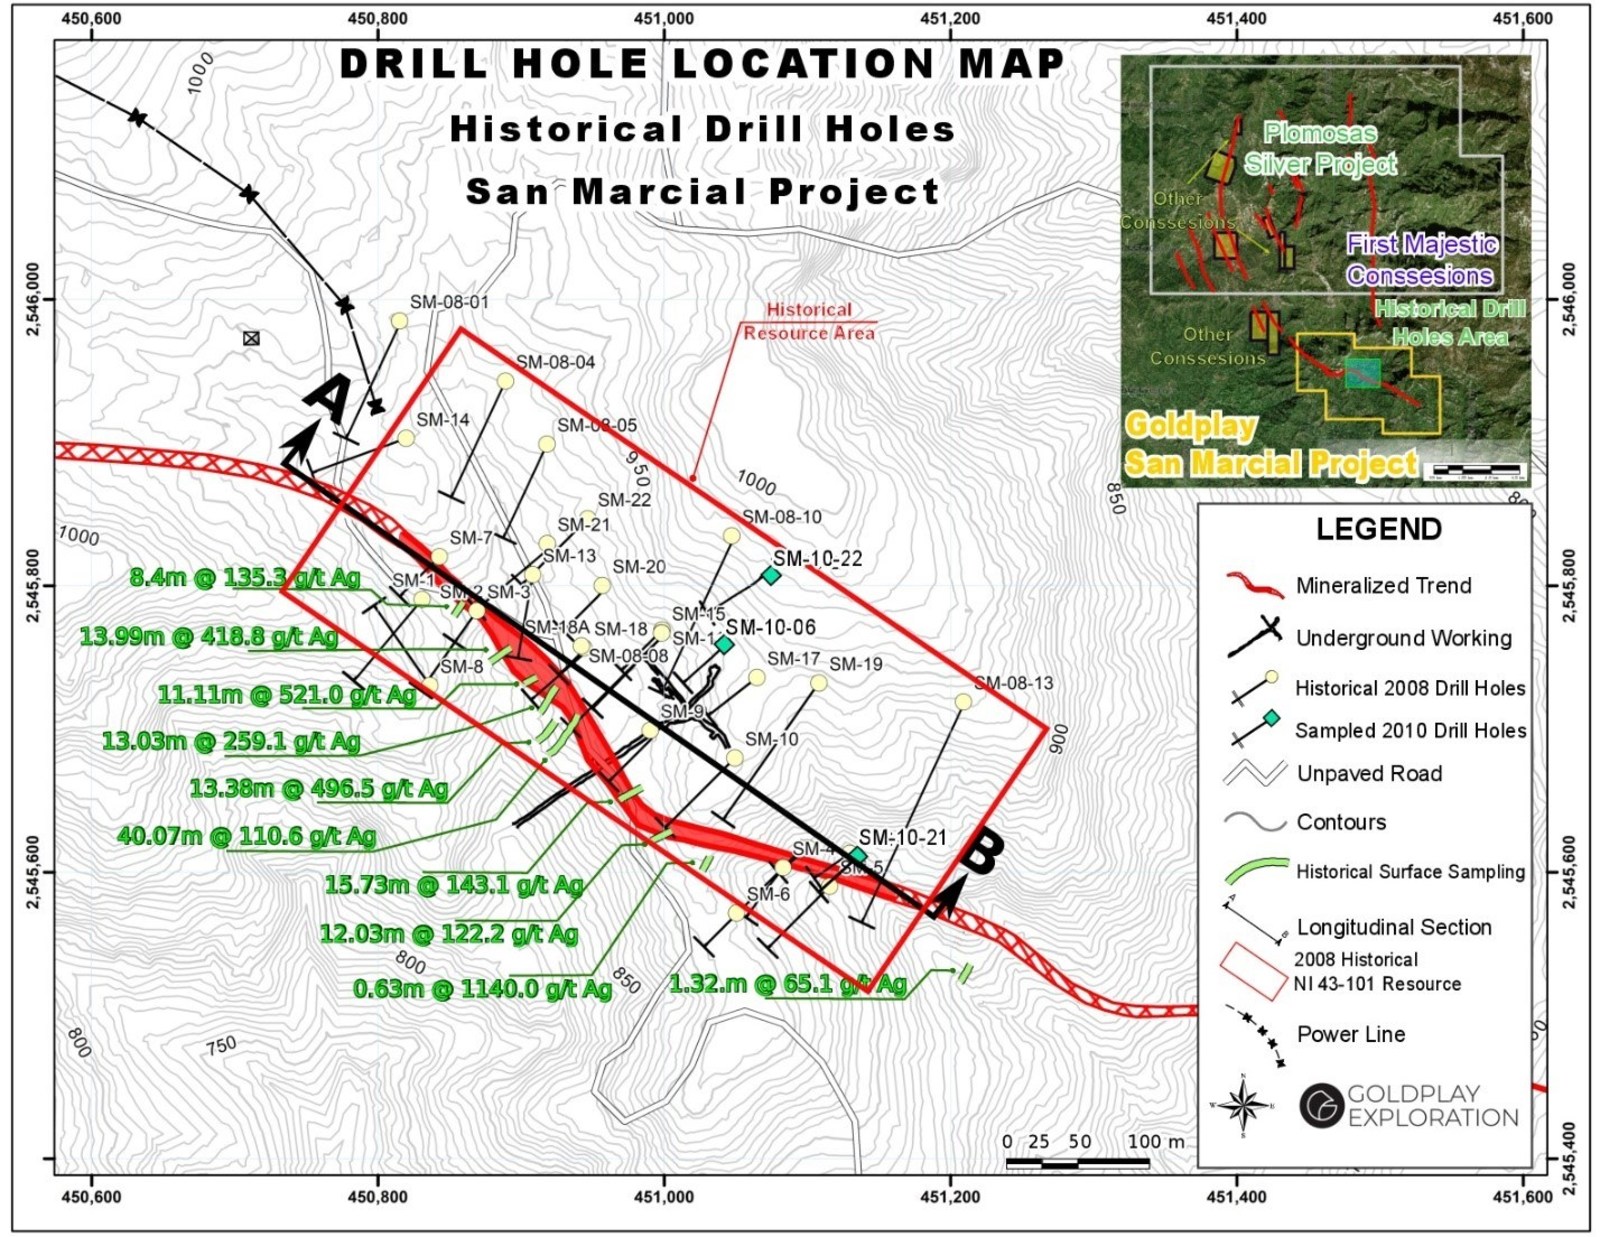 Figure 1: Drill Hole Location Map San Marcial Project